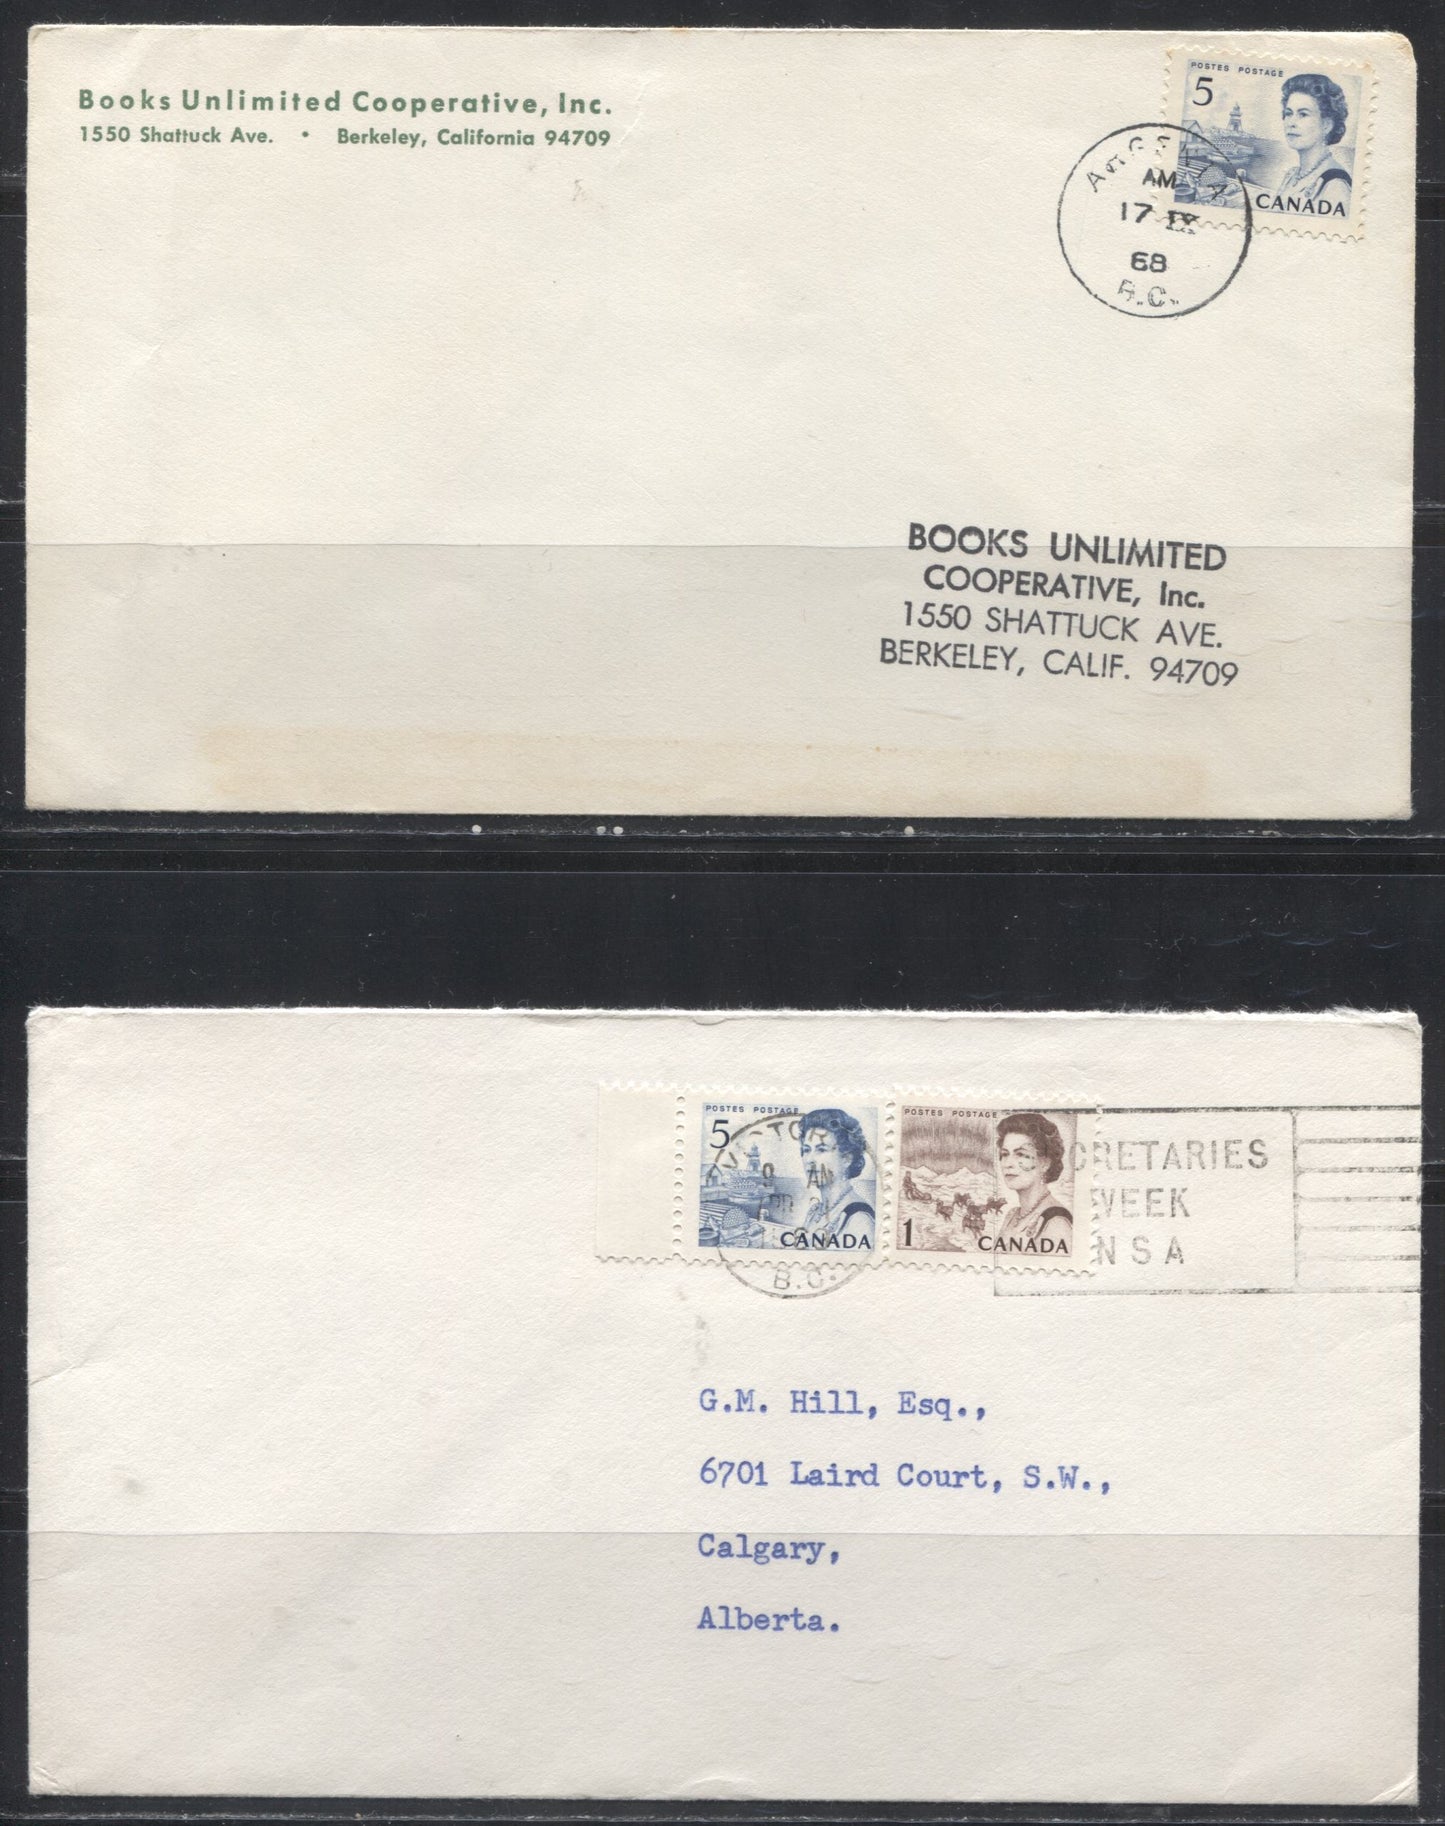 Lot 266 Canada #458, 458i, 458ii, 458iii 5c Deep Blue Atlantic Fishing Village, 1967-1973 Centennial Issue, Usages of DF, NF, LF-fl and HB Papers on 9 Covers and Postcards